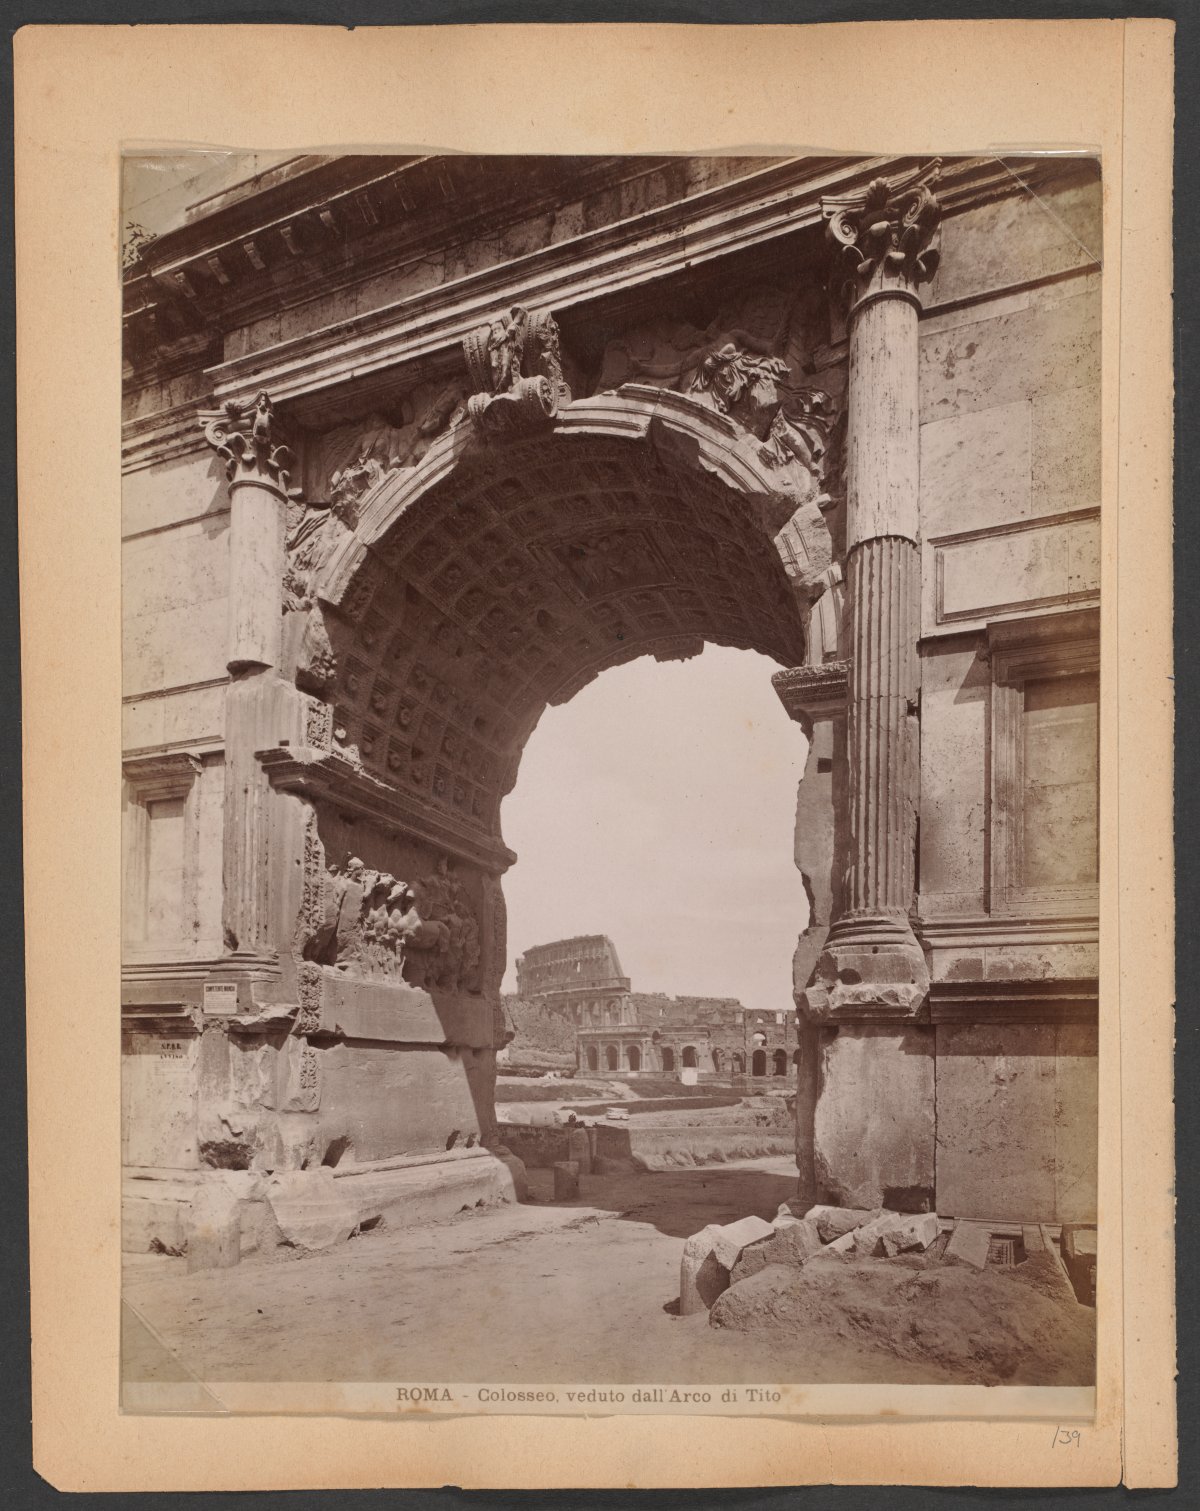 A sepia toned photograph showing the ruins of the Colosseum viewed through the ruins of the Arch of Titus. At the bottom of the photo are words in Italian: "ROMA - Colosseo, verduto dali Arco di Tito" 